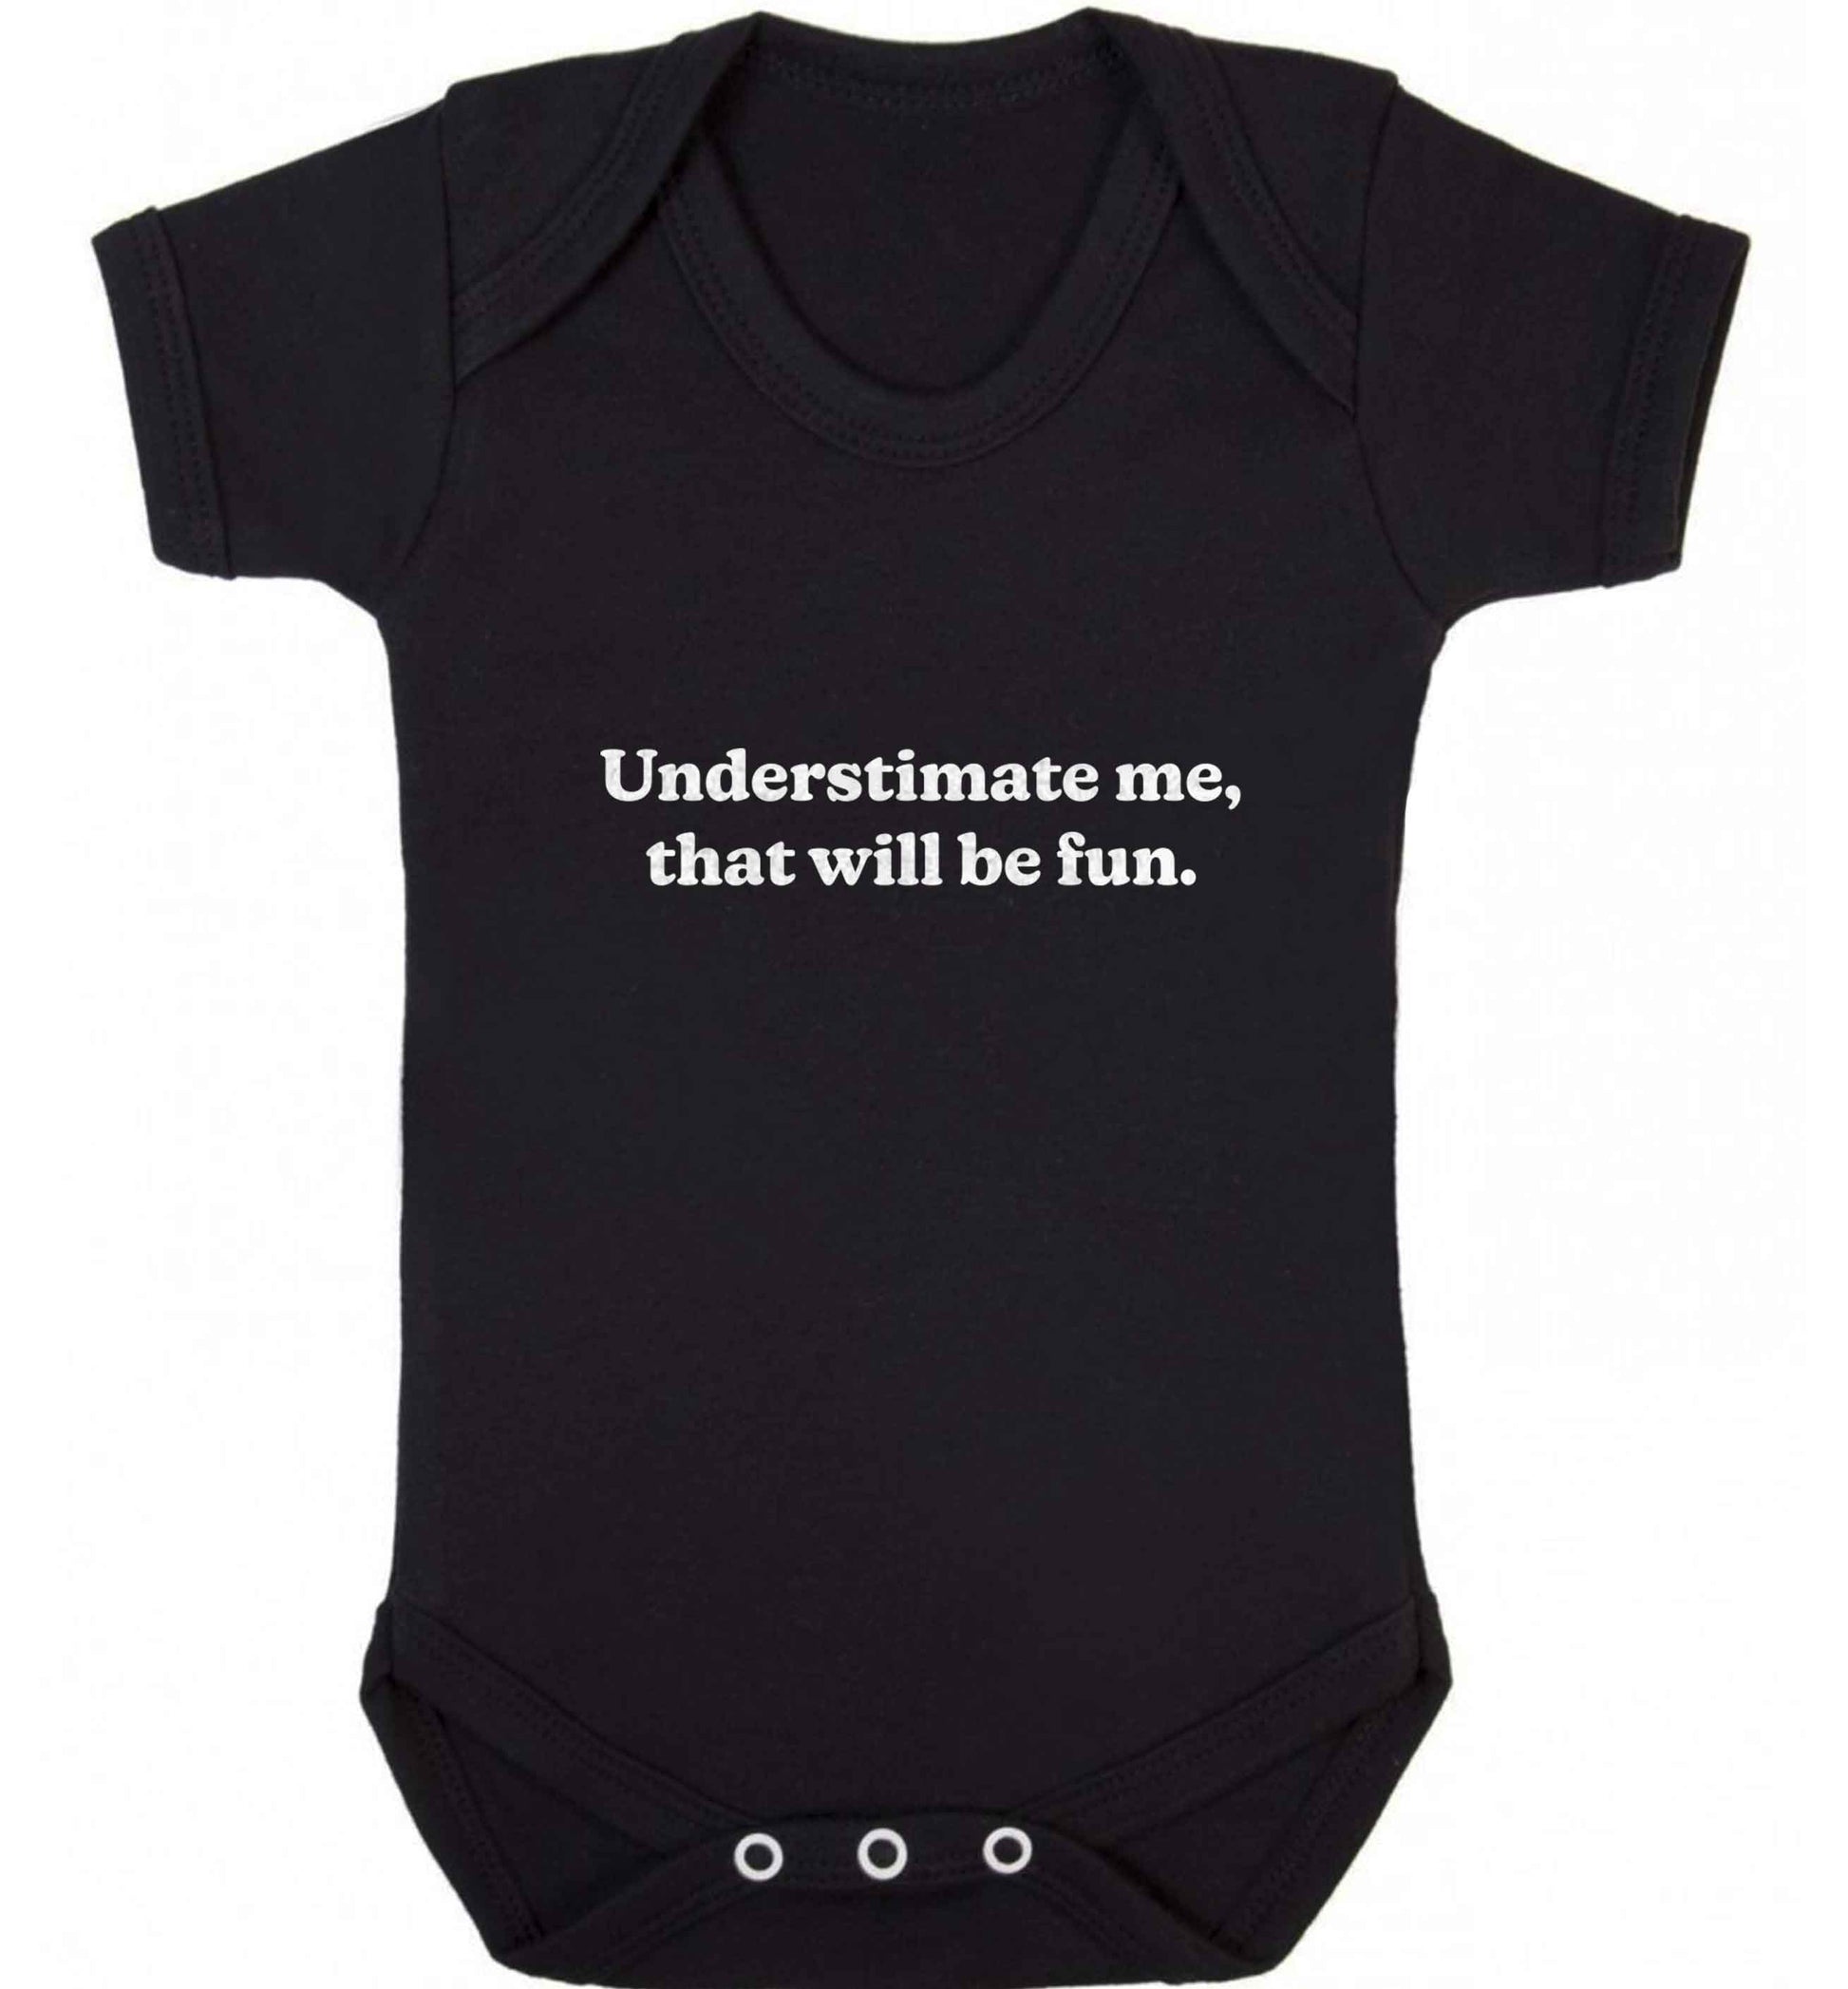 Underestimate me that will be fun baby vest black 18-24 months